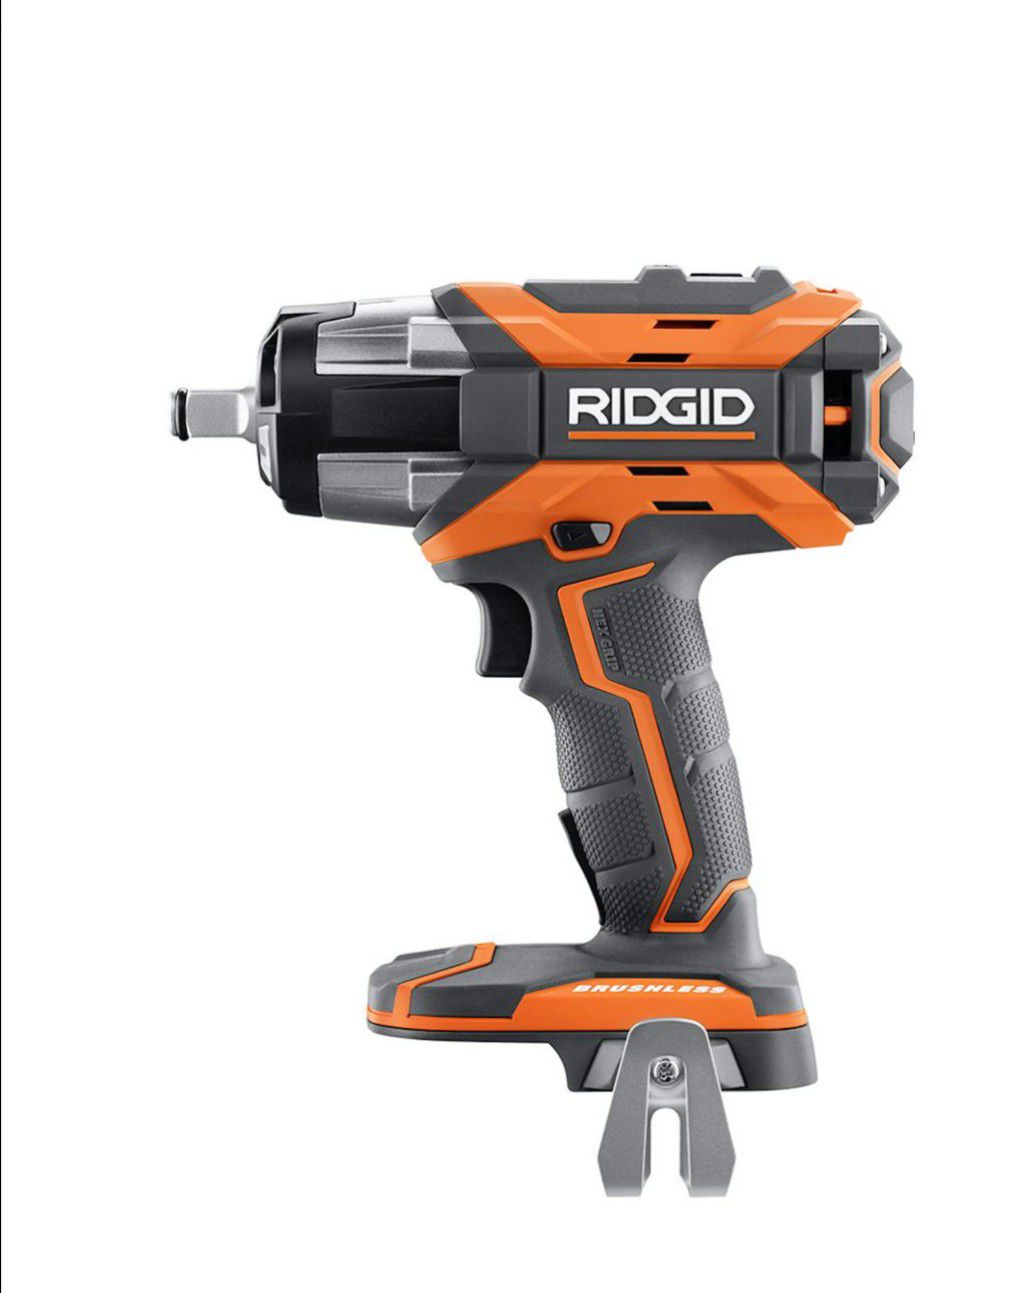 18-Volt GEN5X Cordless Brushless 1/2 in. Impact Wrench (Tool-Only) with Belt Clip